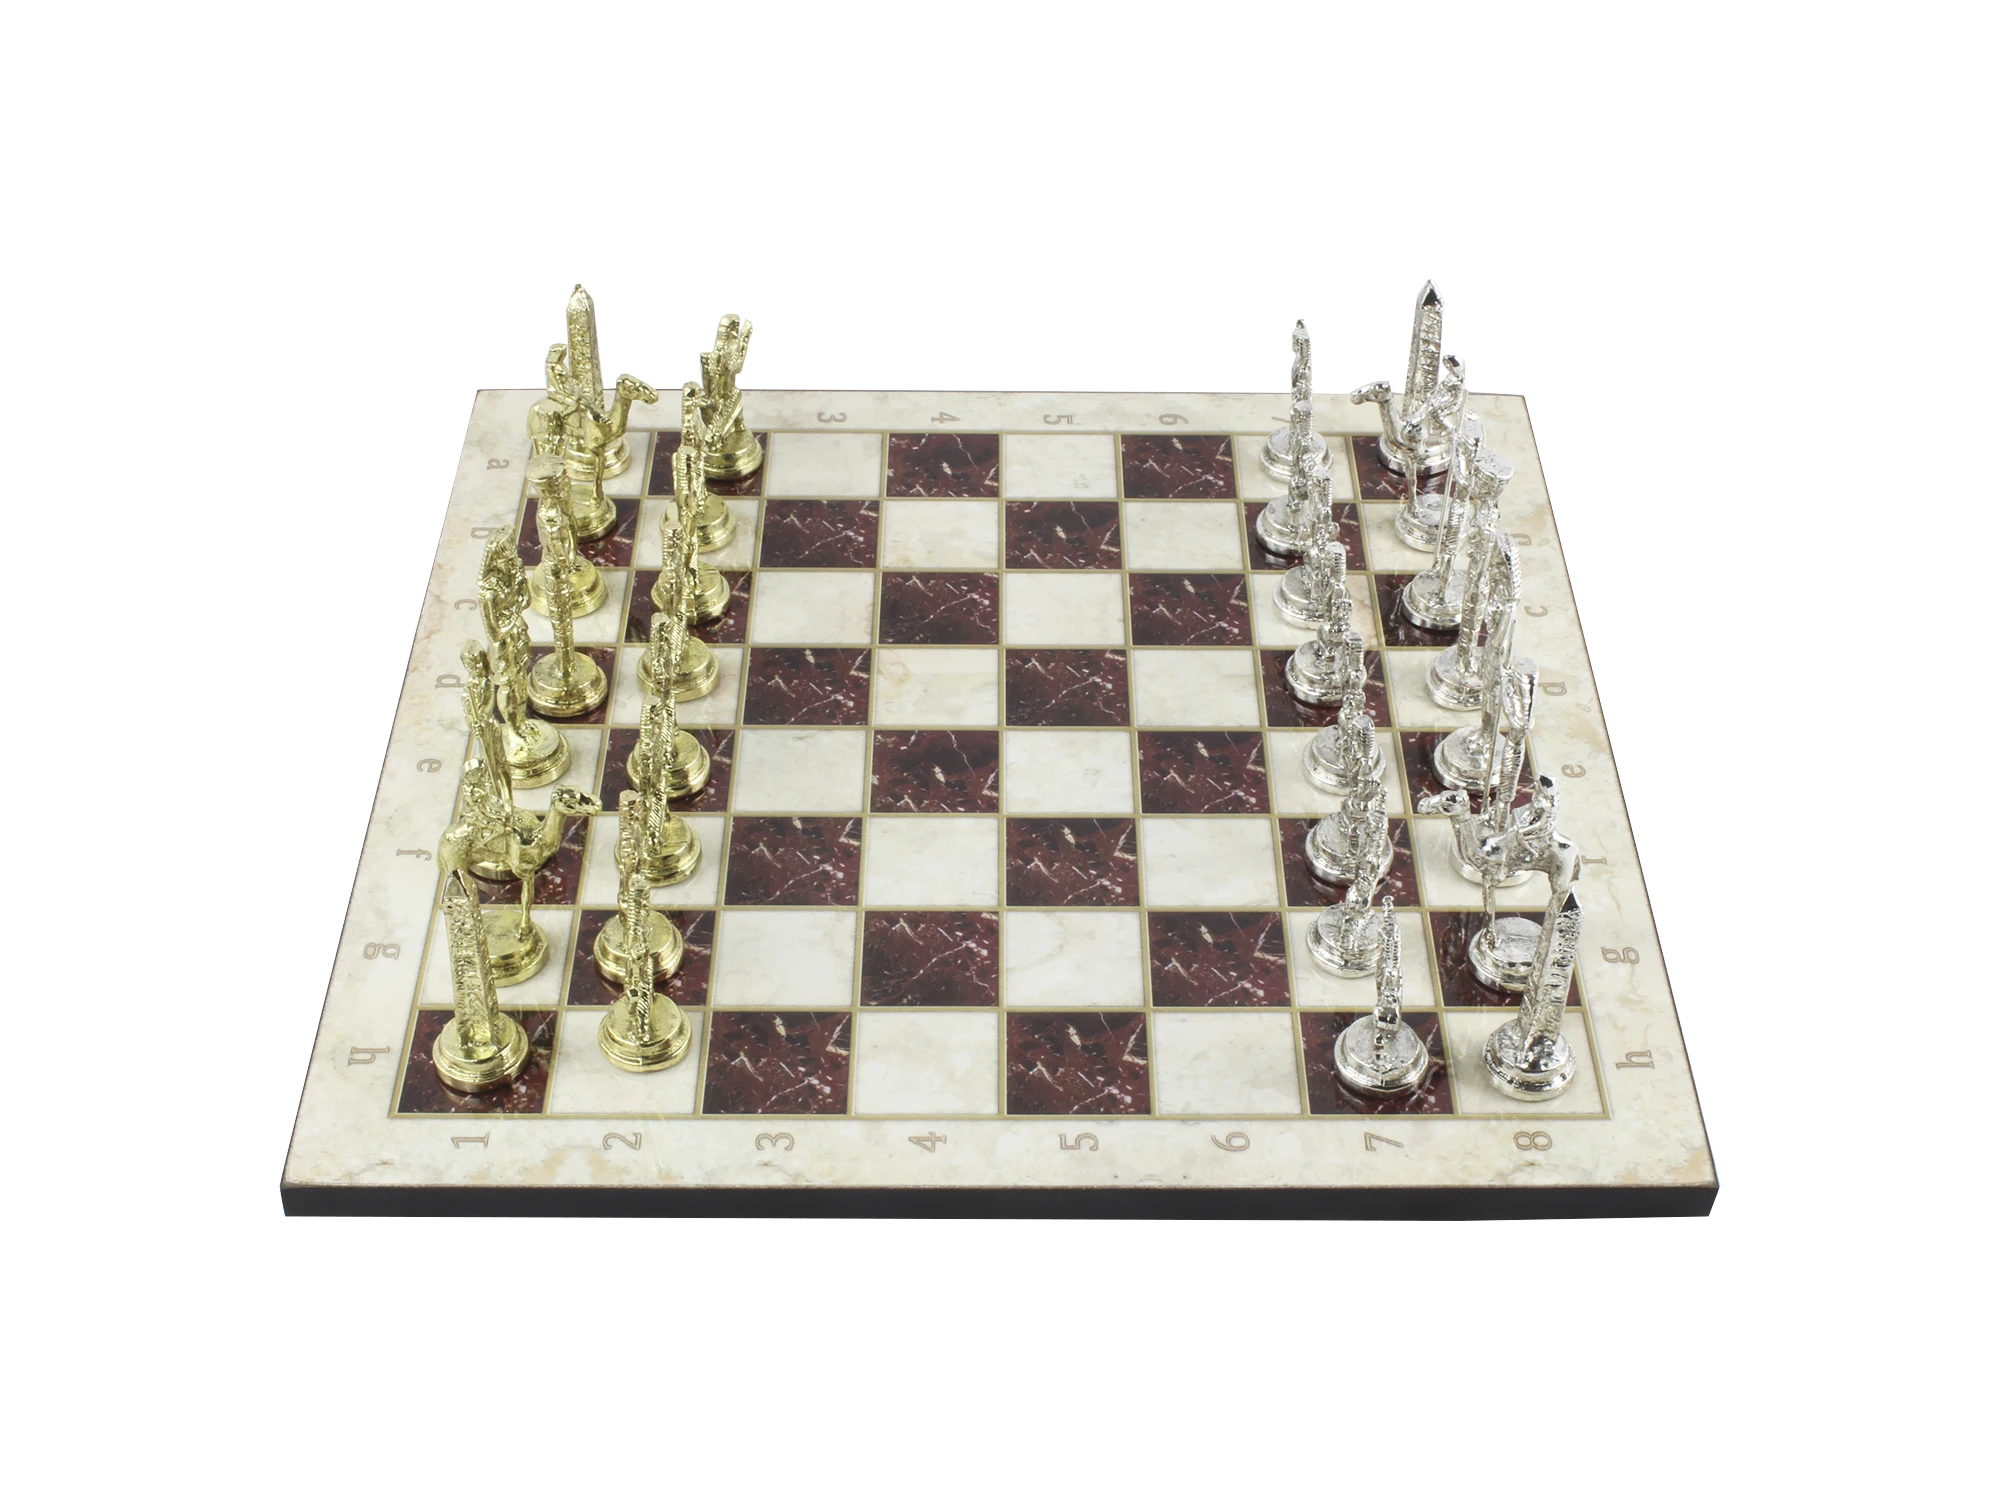 14.5 Inch Marble Design Chessboard and Figures Marble Patterned Chess Board Game Wooden Board Game with Egypt Pharaoh Figures 3 5 inch front panel 2 port usb 3 0 2 port usb 2 0 adapter expansion board for diy computer case